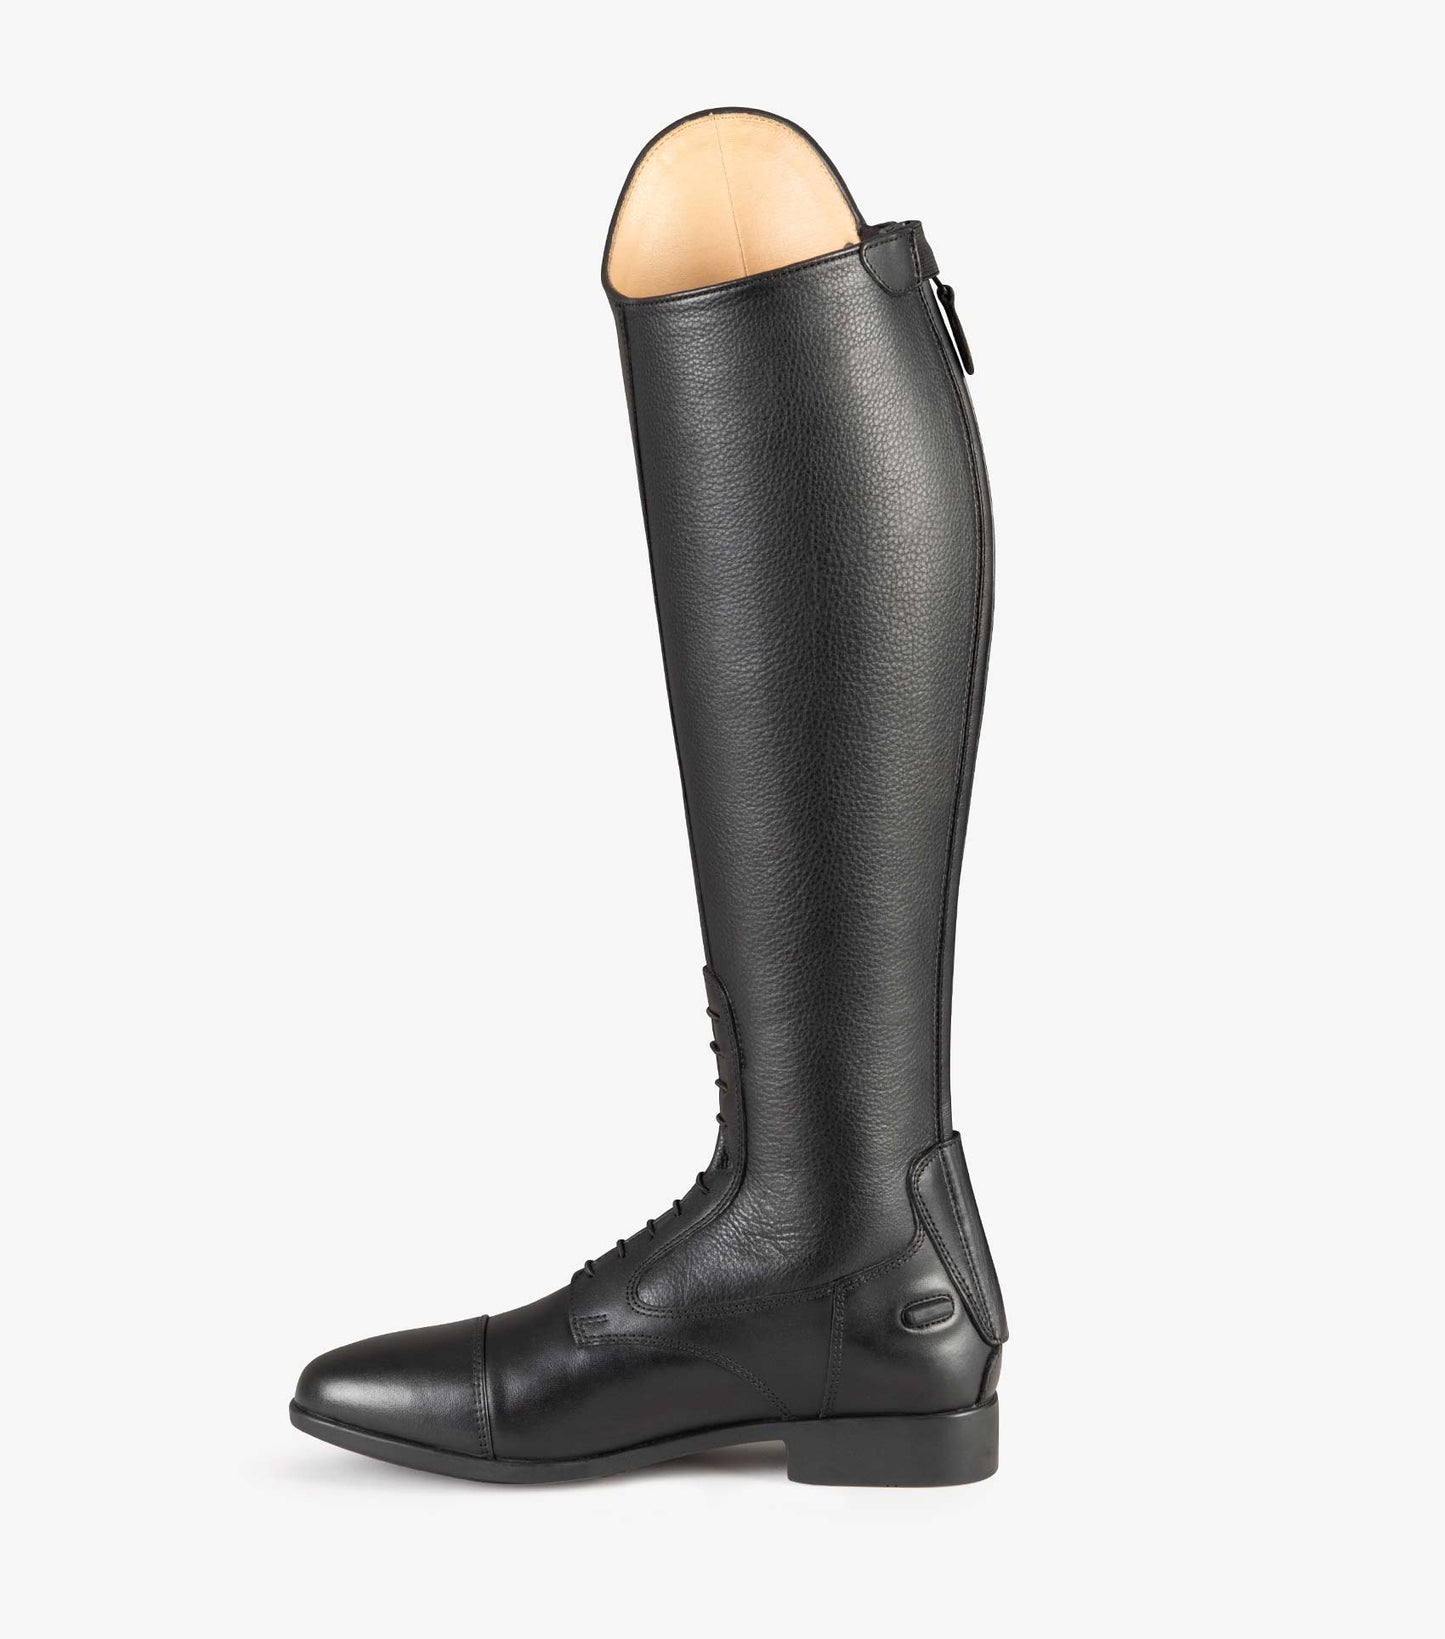 Premier Equine Calanthe Ladies Leather Field Tall Riding Boot - Black